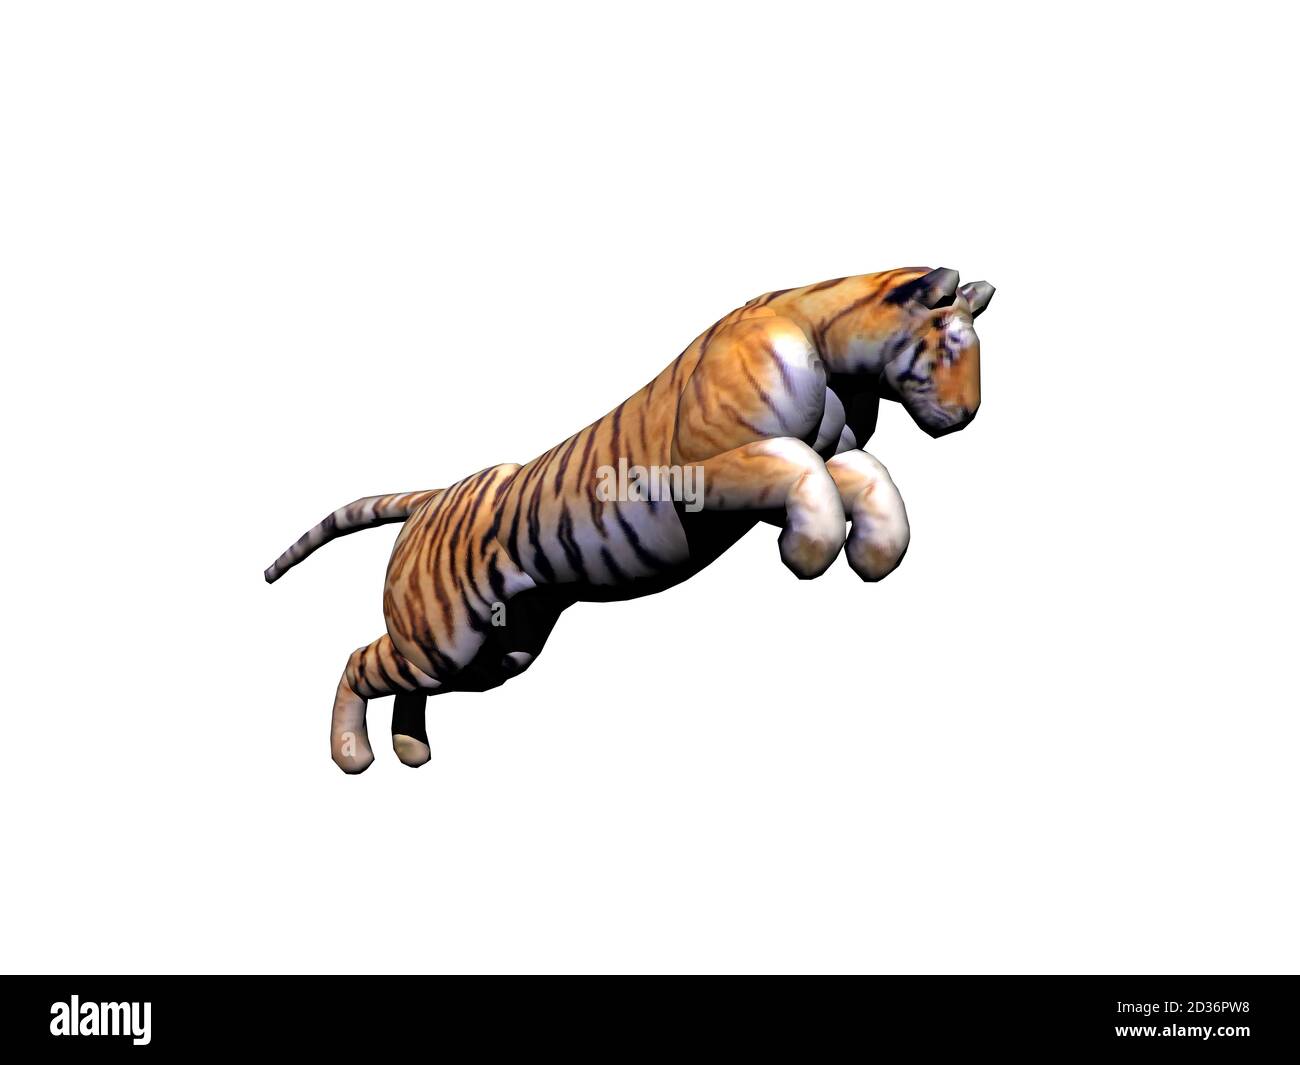 large graceful striped tiger jumping Stock Photo